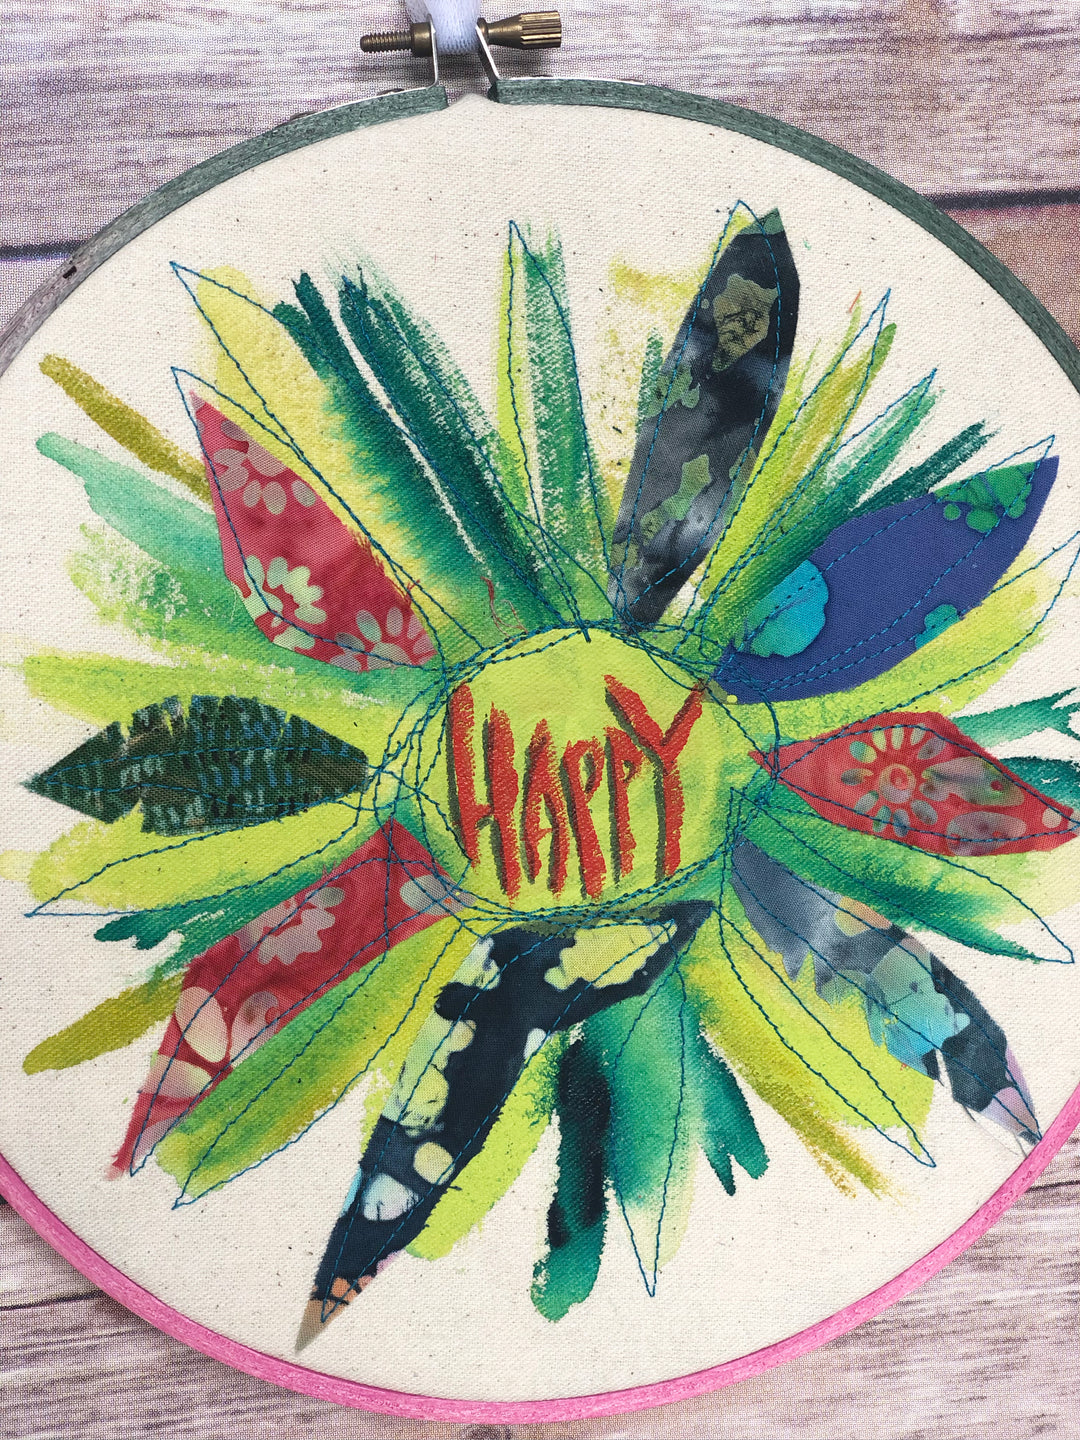 round dyed wooden hoop art, with painted and stitched fabric leaves in colors of yellow and orange and red, with the word 'happy' painted in the center